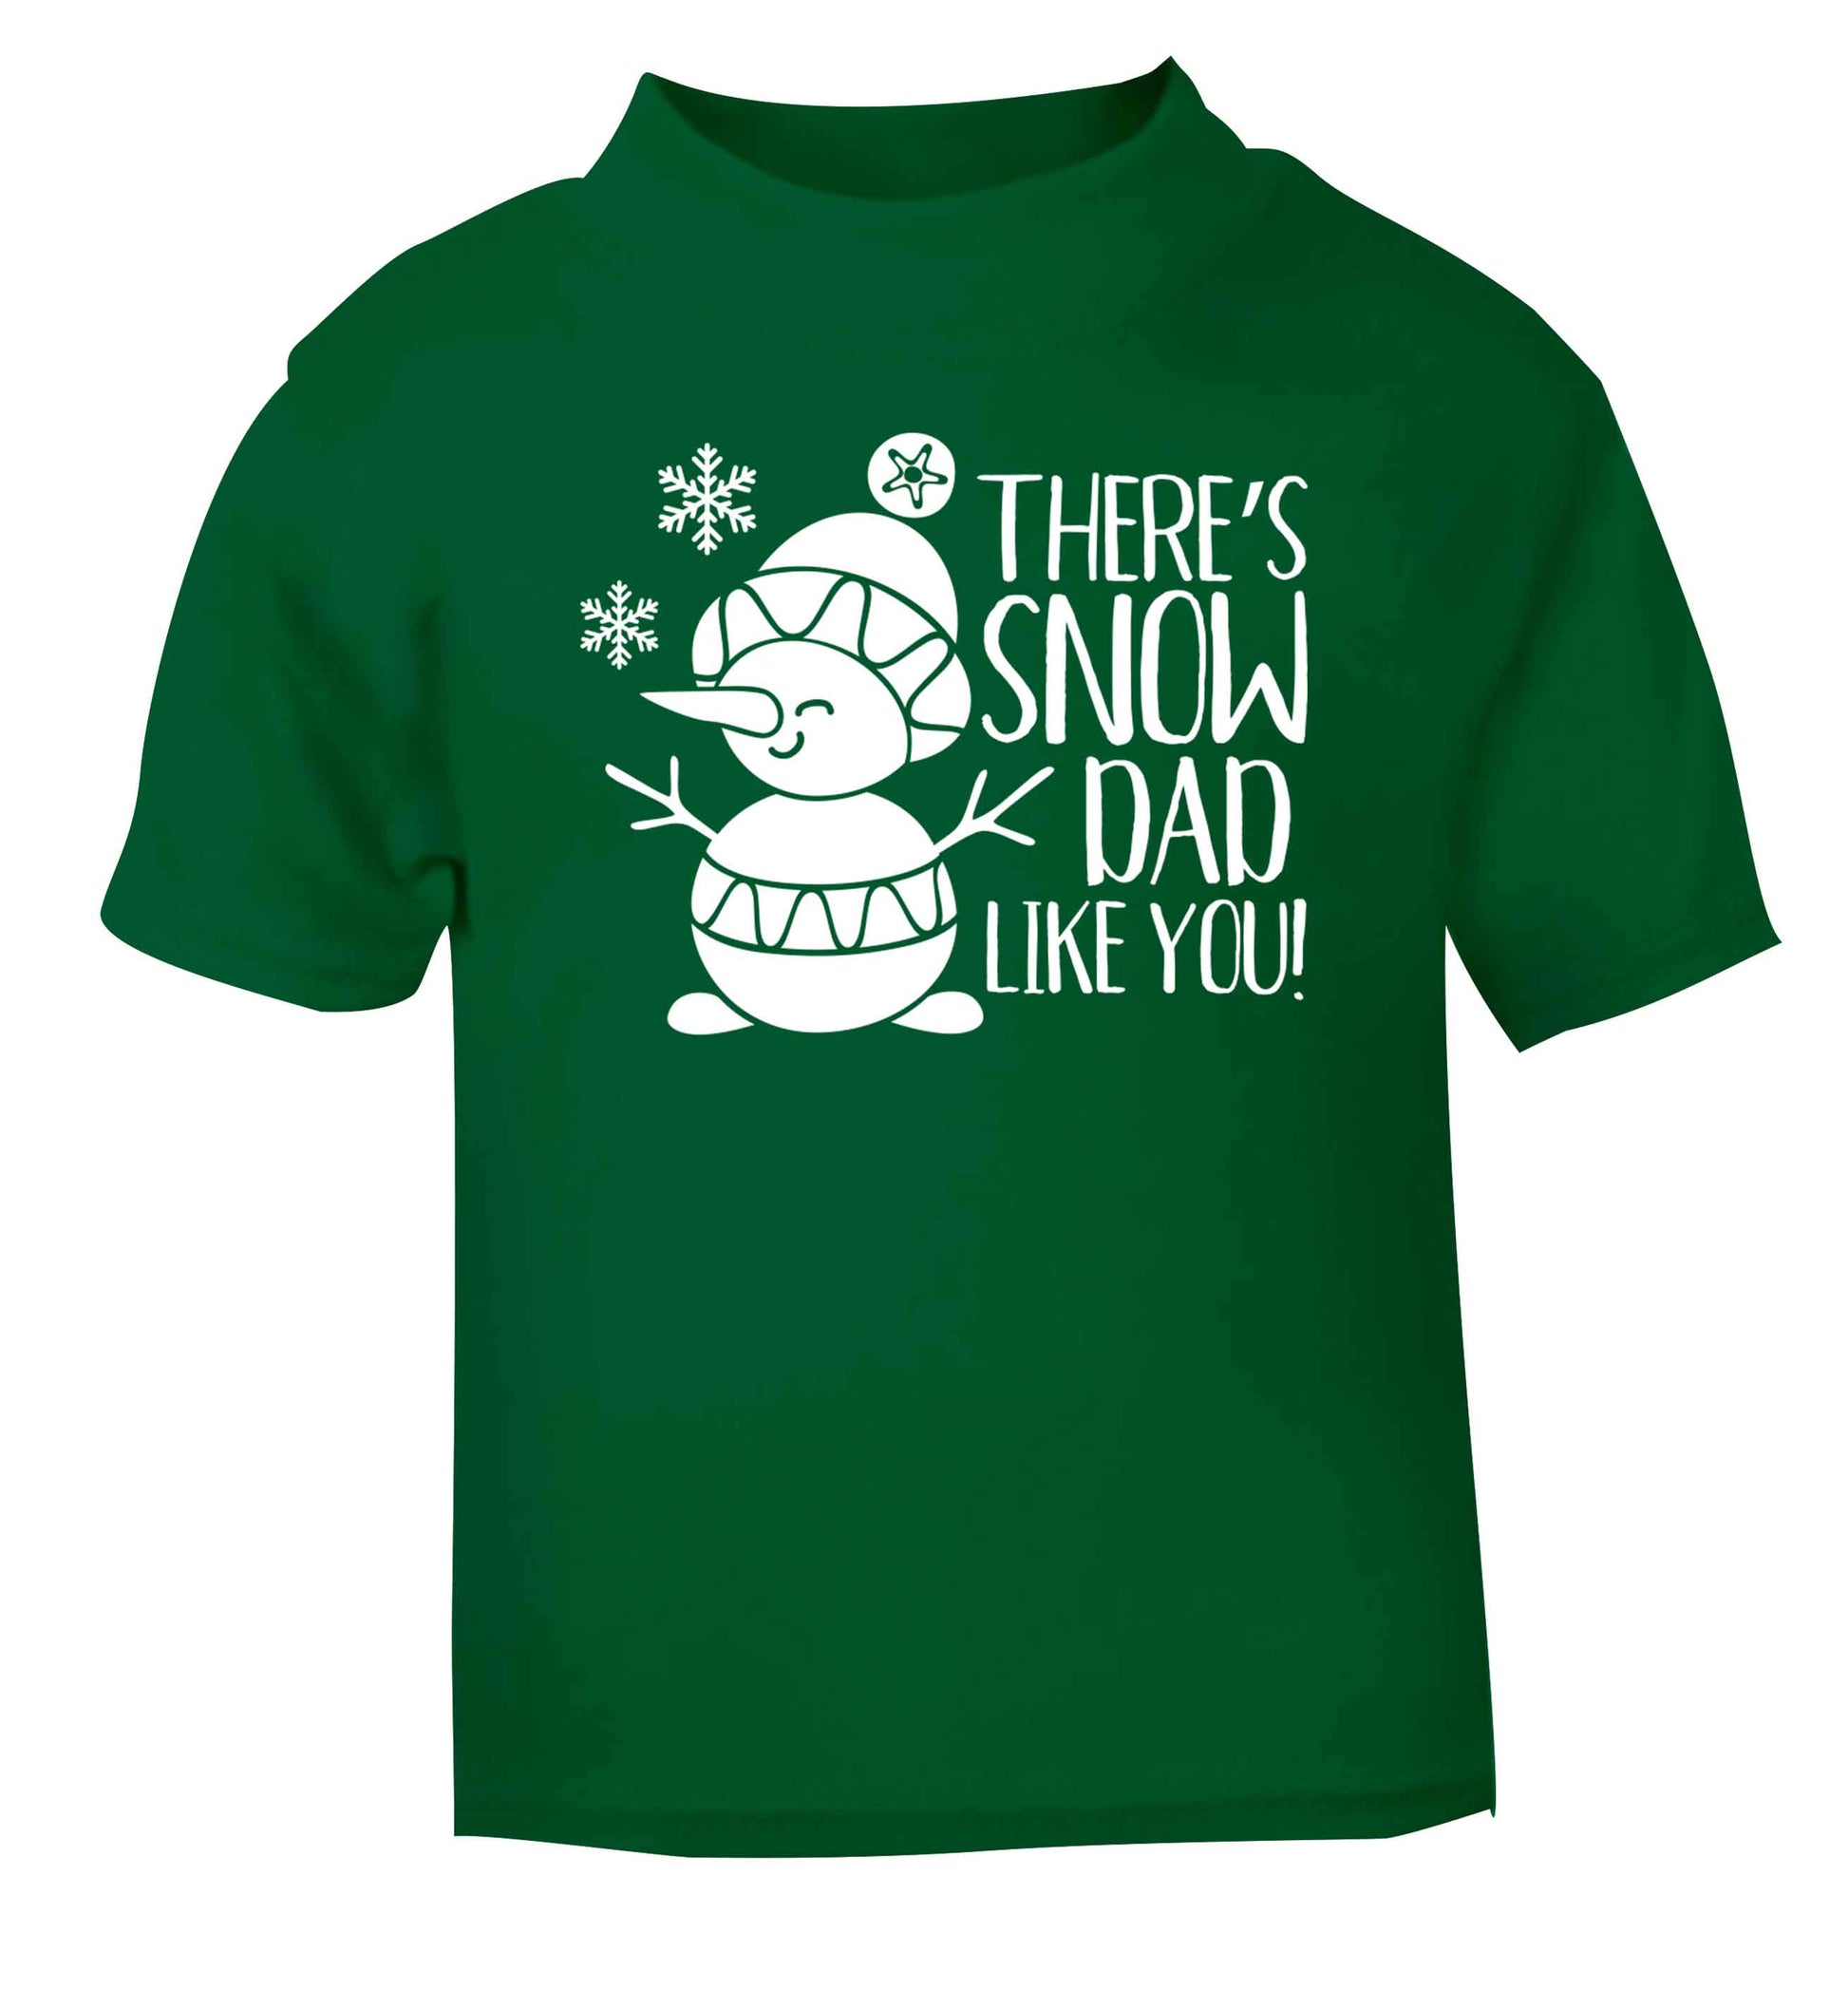 There's snow dad like you green baby toddler Tshirt 2 Years